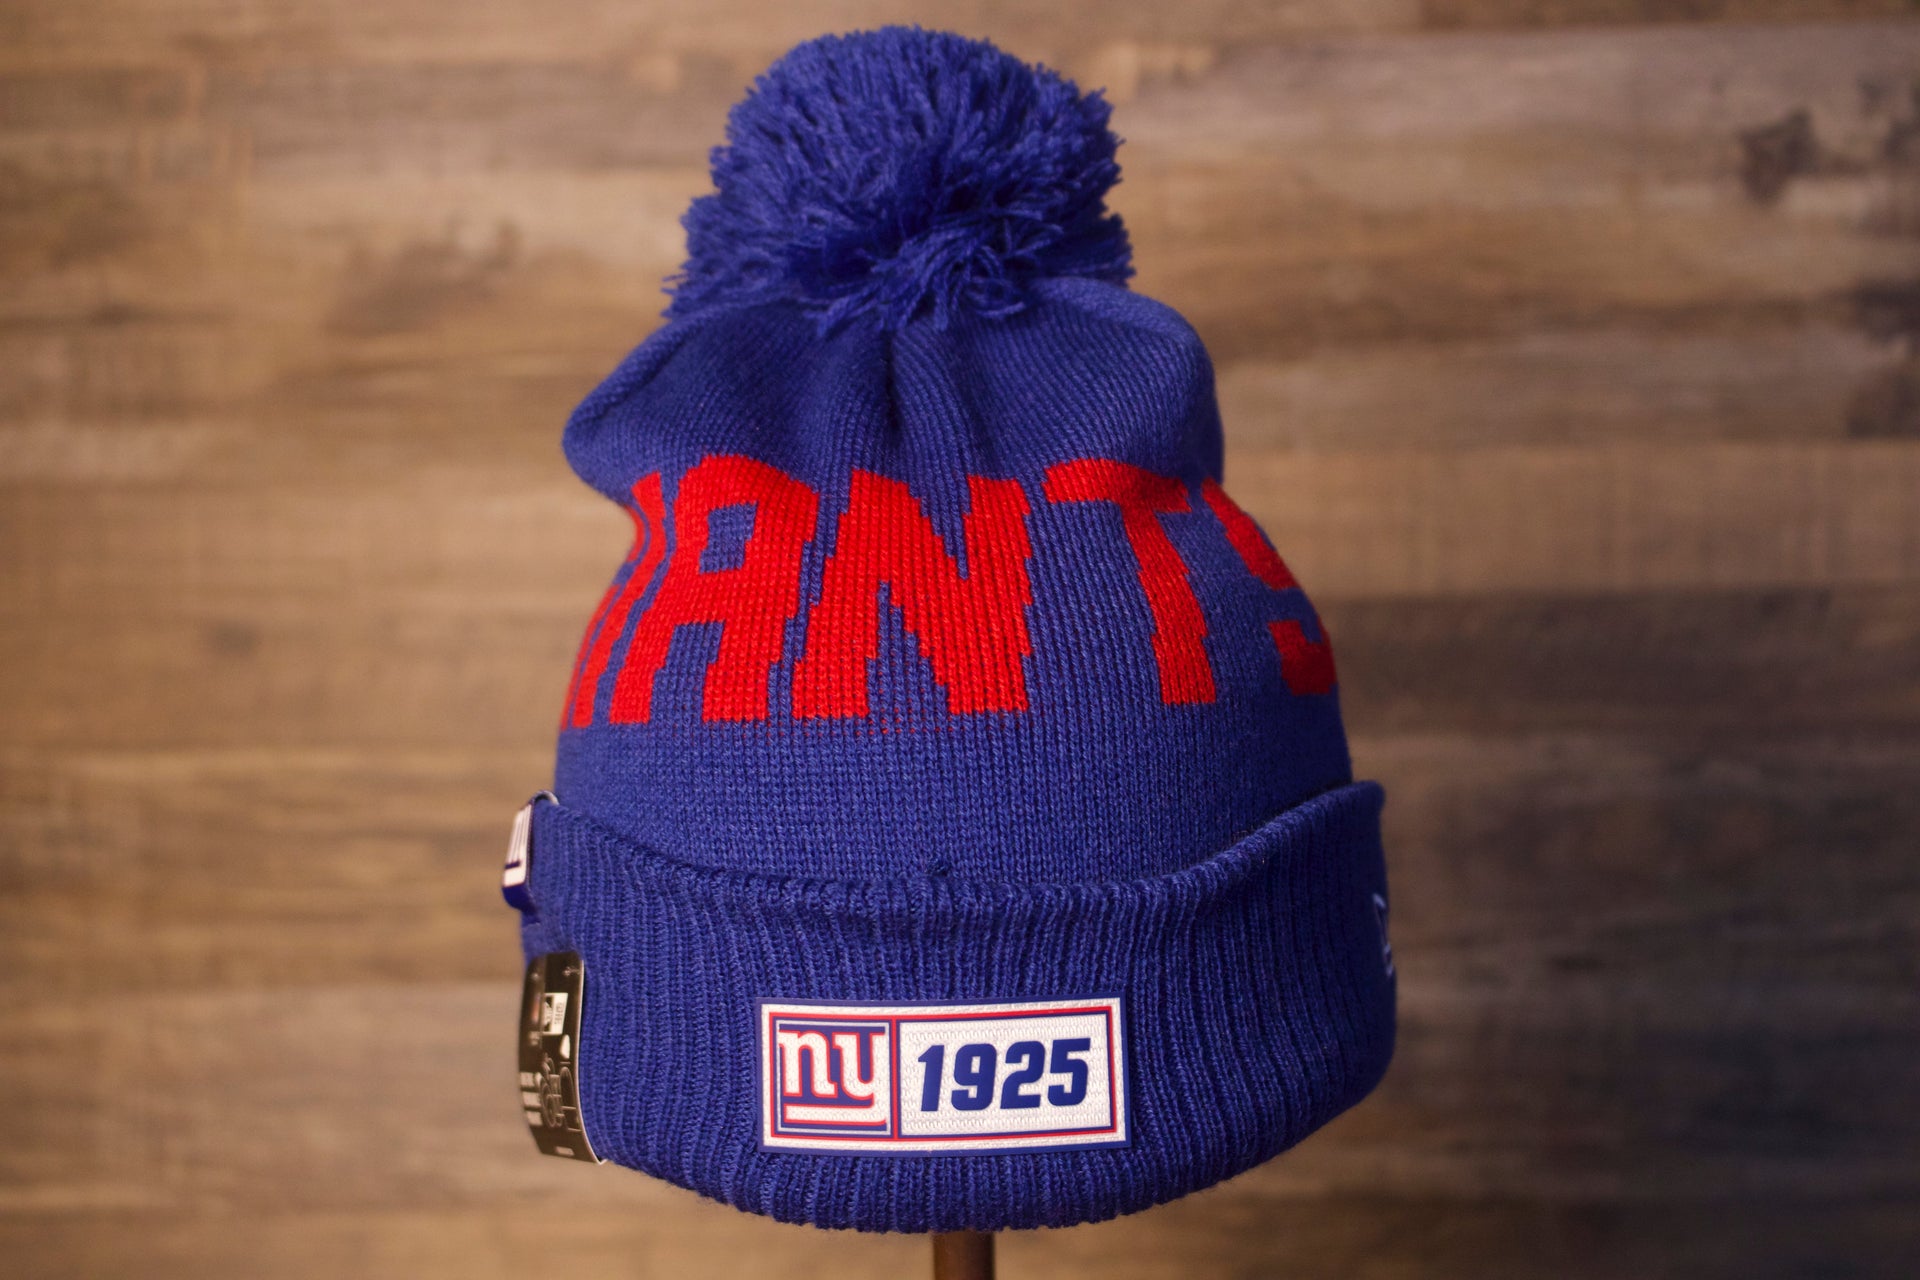 Giants Beanie | New York Giants 2019 On-Field Beanie | Giants Blue Winter Hat  on the front of the sideline giants 2019 beanie is the year the giants were founded and the name giants in red